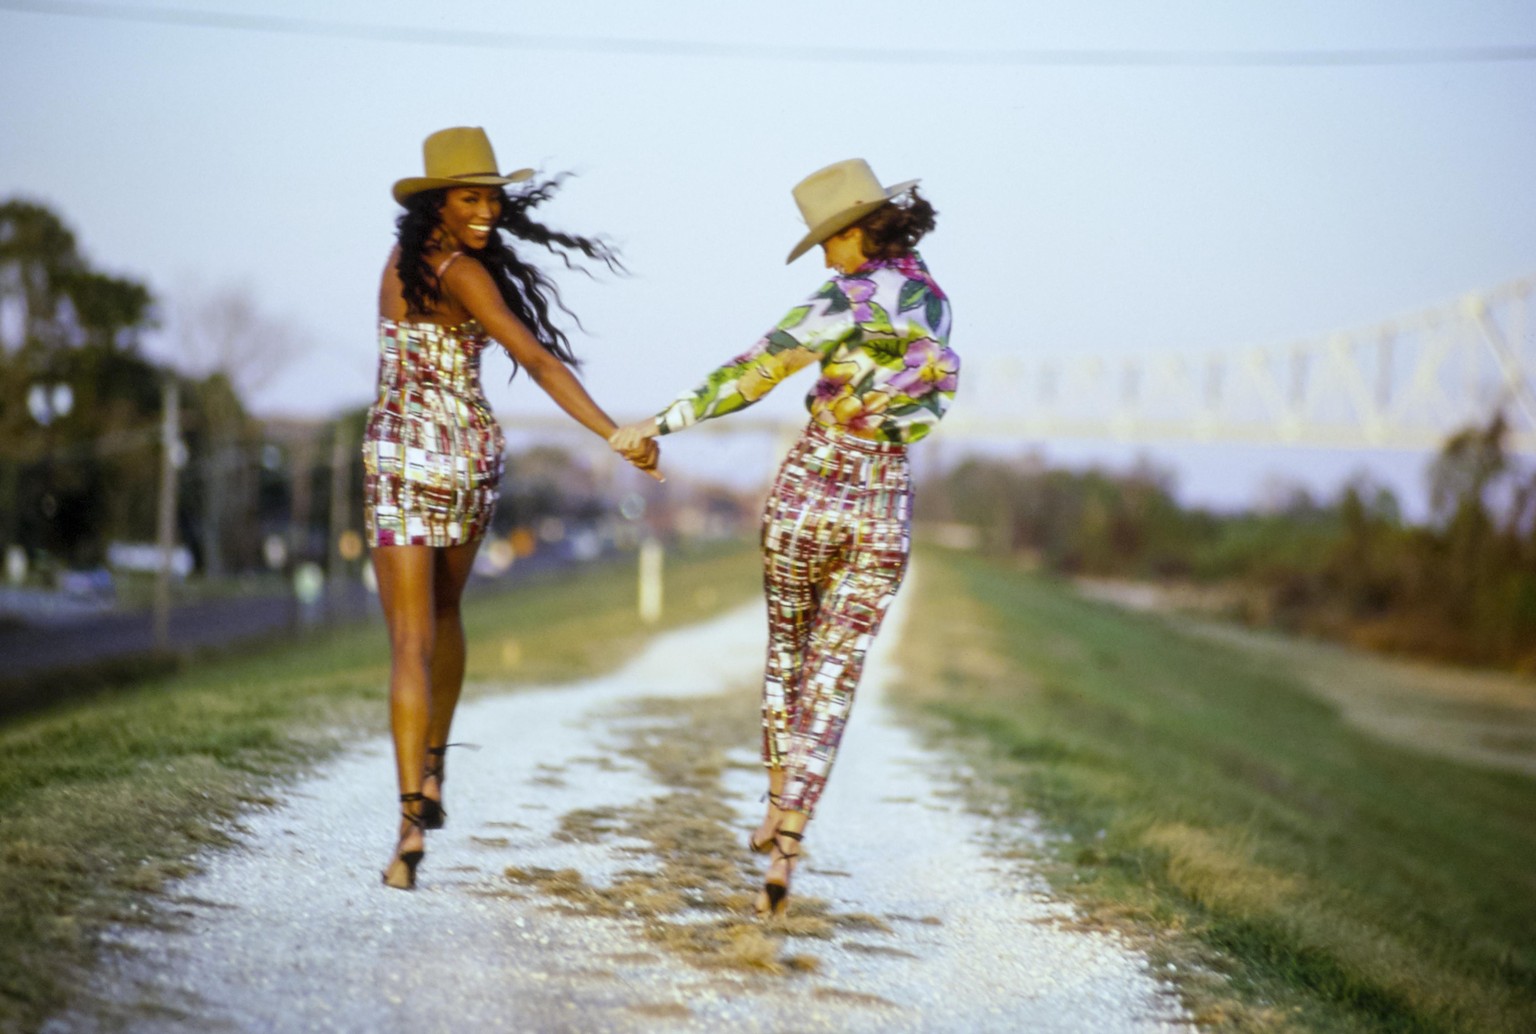 UNITED STATES - FEBRUARY 1: Models, Naomi Campbell (left) and Christy Turlington walking down road wearing patterned outfits by Todd Oldham CREDIT MUST READ: Arthur Elgort/Conde Nast via Getty Images. ...